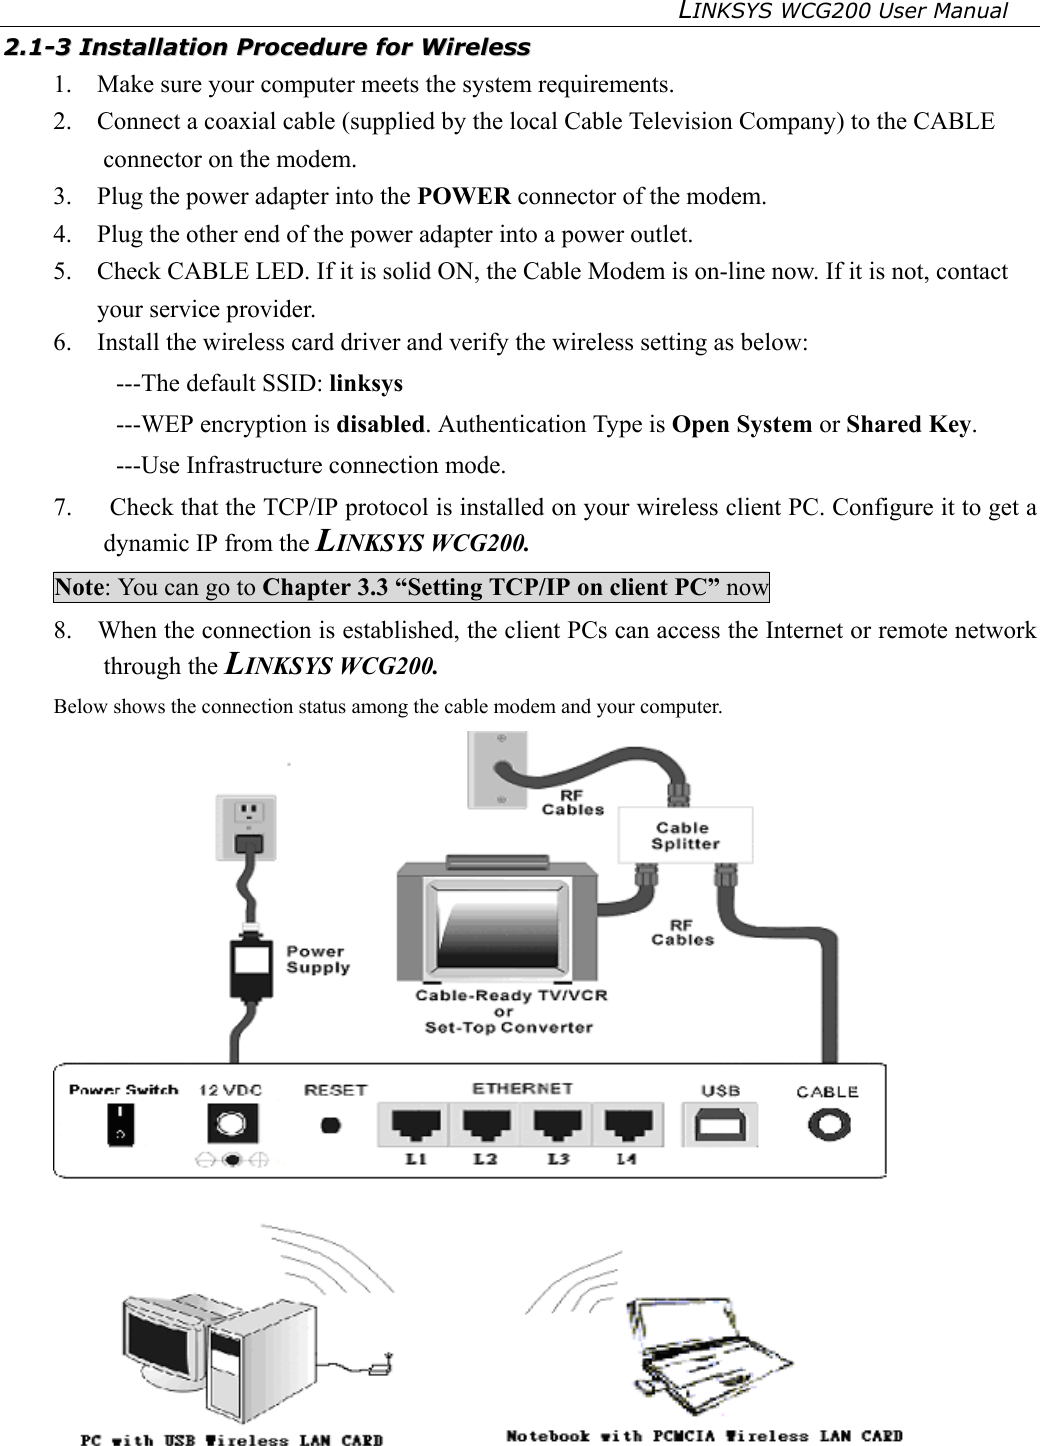 LINKSYS WCG200 User Manual   22..11--33  IInnssttaallllaattiioonn  PPrroocceedduurree  ffoorr  WWiirreelleessss  1.    Make sure your computer meets the system requirements. 2.    Connect a coaxial cable (supplied by the local Cable Television Company) to the CABLE connector on the modem.   3.    Plug the power adapter into the POWER connector of the modem. 4.    Plug the other end of the power adapter into a power outlet.   5.    Check CABLE LED. If it is solid ON, the Cable Modem is on-line now. If it is not, contact your service provider. 6.    Install the wireless card driver and verify the wireless setting as below: ---The default SSID: linksys ---WEP encryption is disabled. Authentication Type is Open System or Shared Key. ---Use Infrastructure connection mode. 7.   Check that the TCP/IP protocol is installed on your wireless client PC. Configure it to get a dynamic IP from the LINKSYS WCG200. Note: You can go to Chapter 3.3 “Setting TCP/IP on client PC” now 8.    When the connection is established, the client PCs can access the Internet or remote network through the LINKSYS WCG200. Below shows the connection status among the cable modem and your computer.  